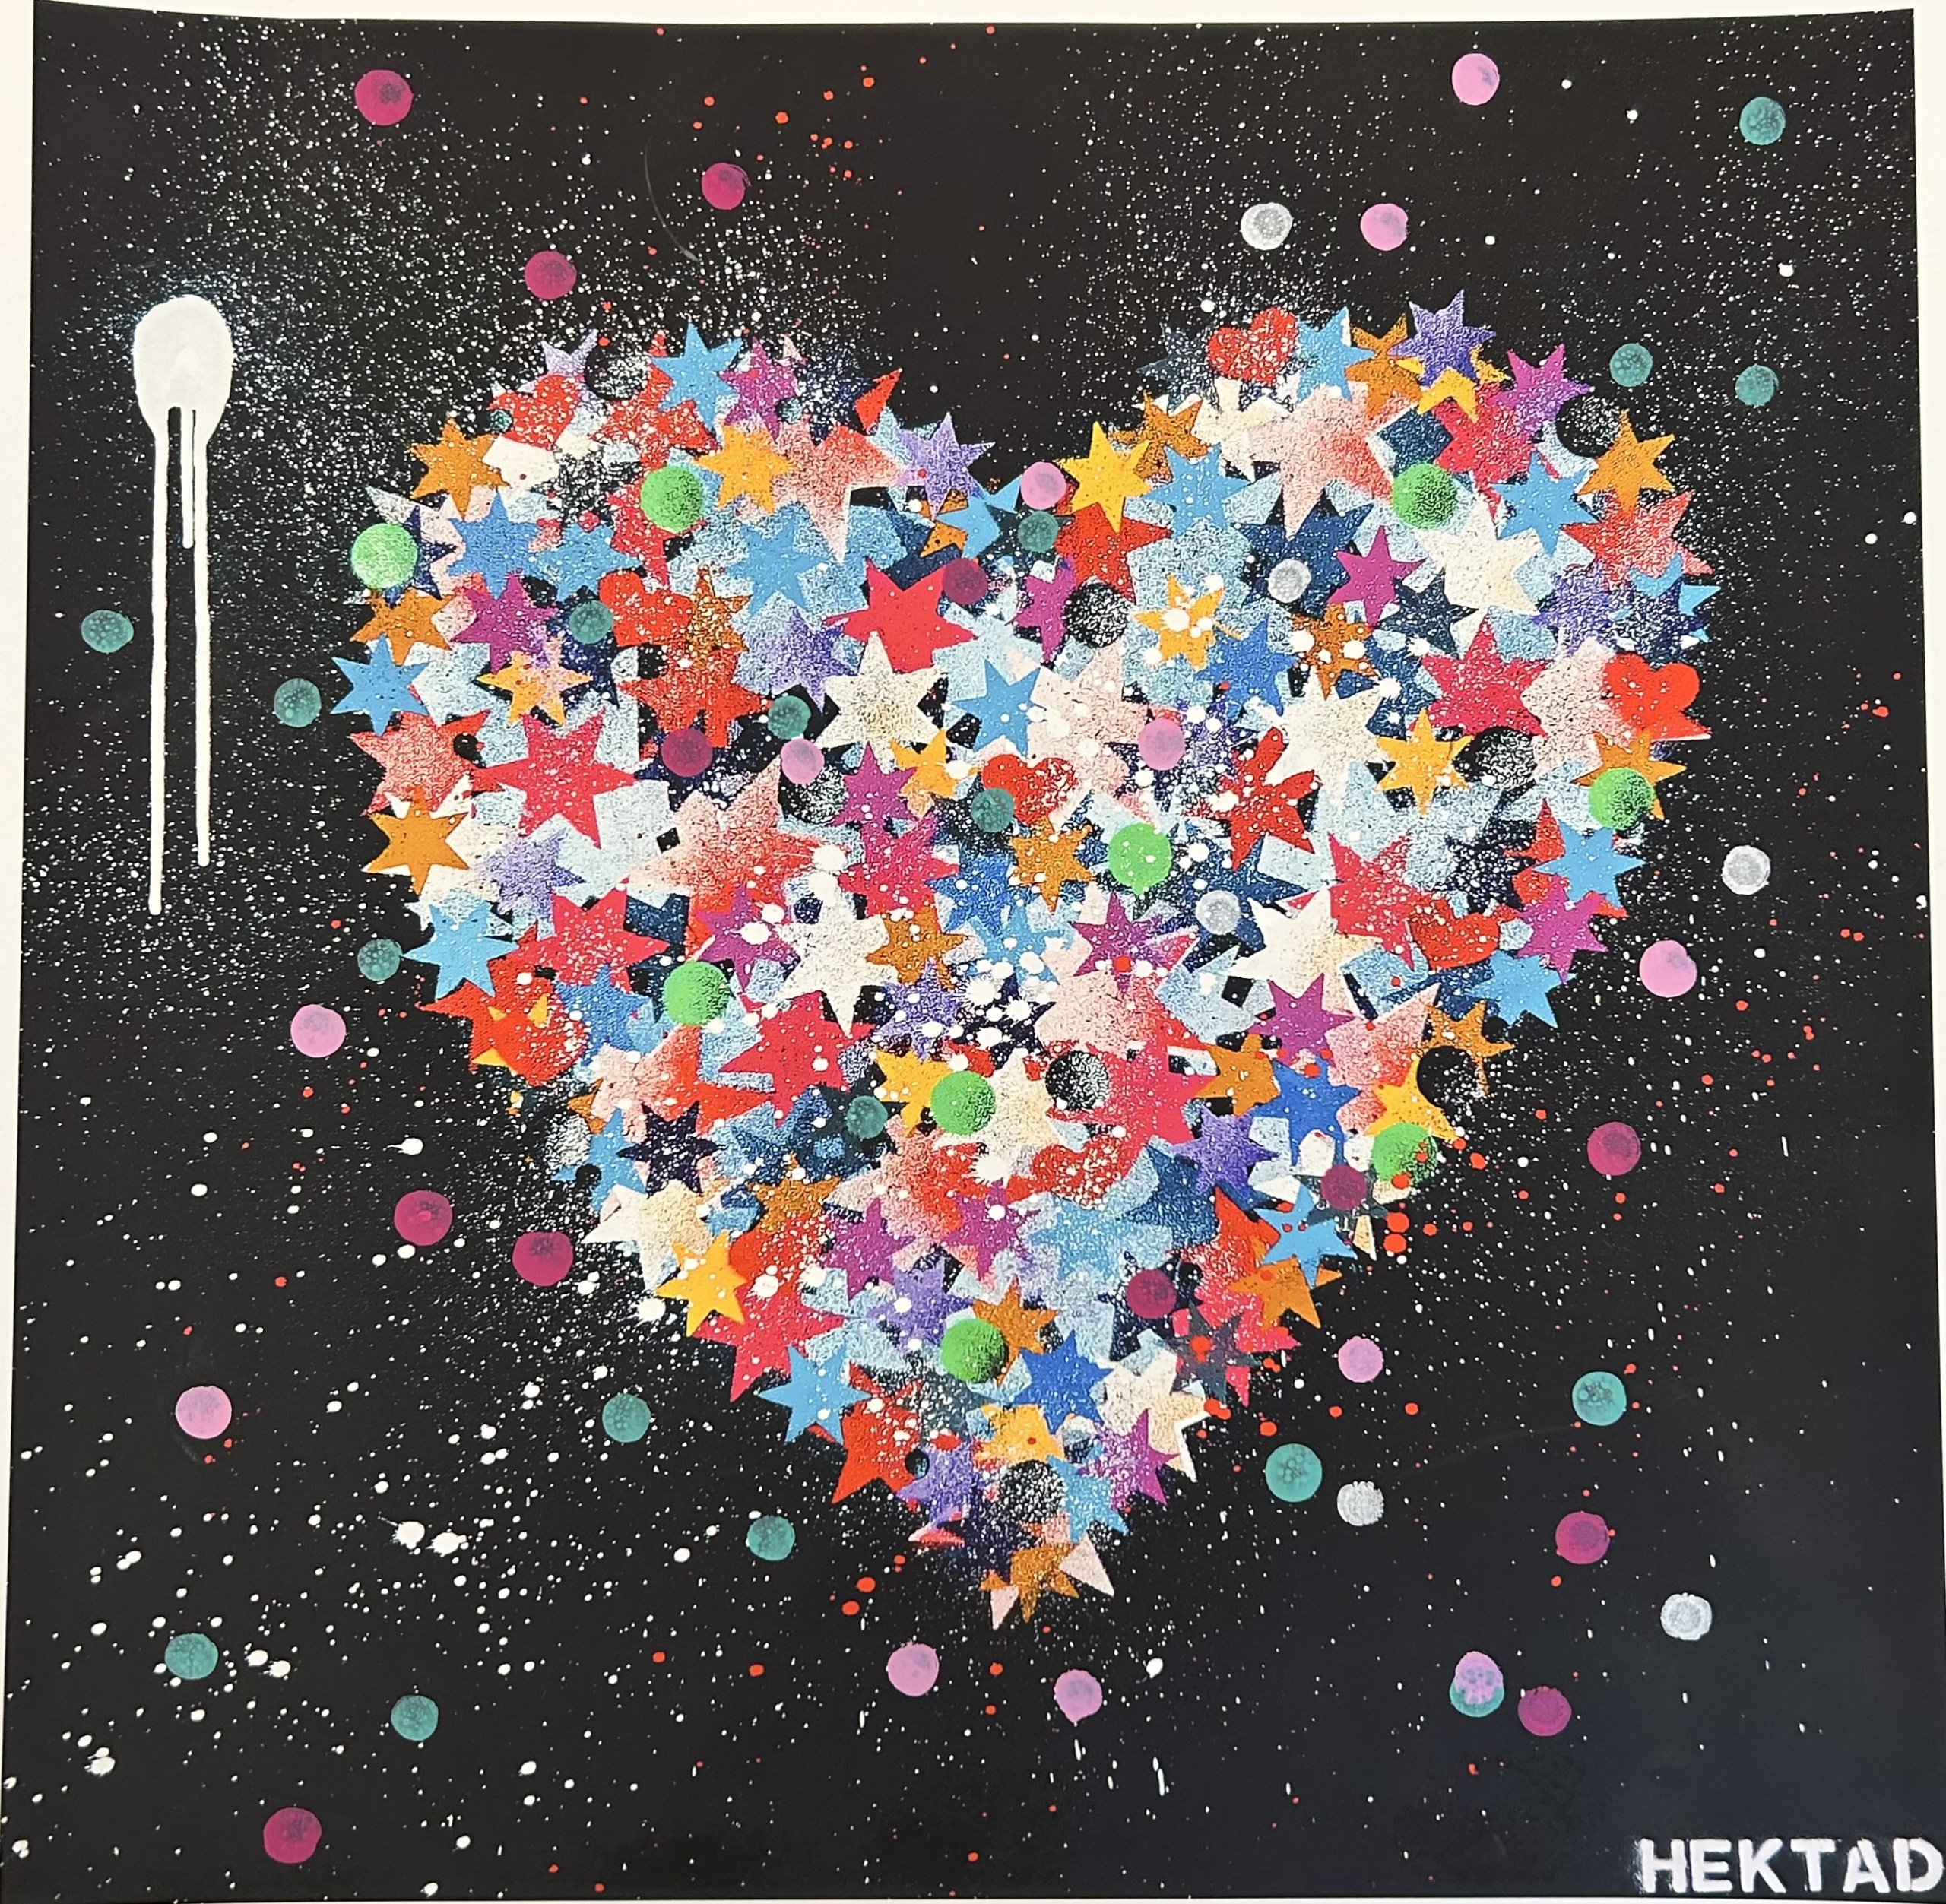 HEKTAD "Star of my Heart" (2021, Giclee Print, 25.25" x 25.25") at Mark Miller Gallery